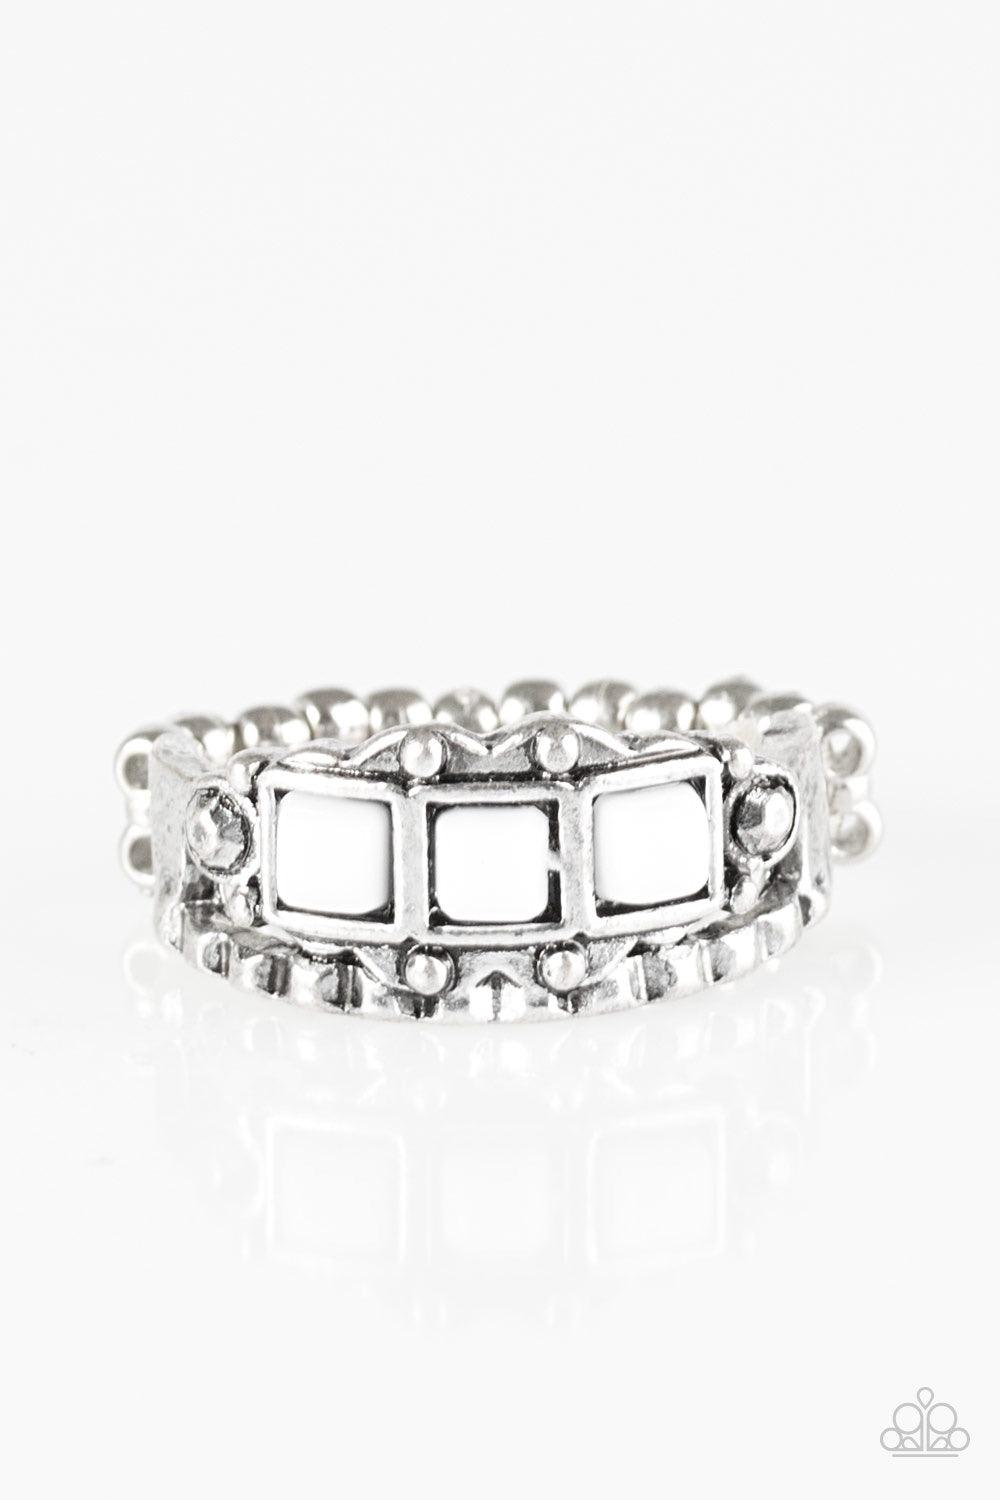 Paparazzi Accessories Color Me EMPRESSed! - White Featuring a square cut, white beads are pressed into a dainty silver band radiating with tribal inspired textures. Features a dainty stretchy band for a flexible fit. Jewelry